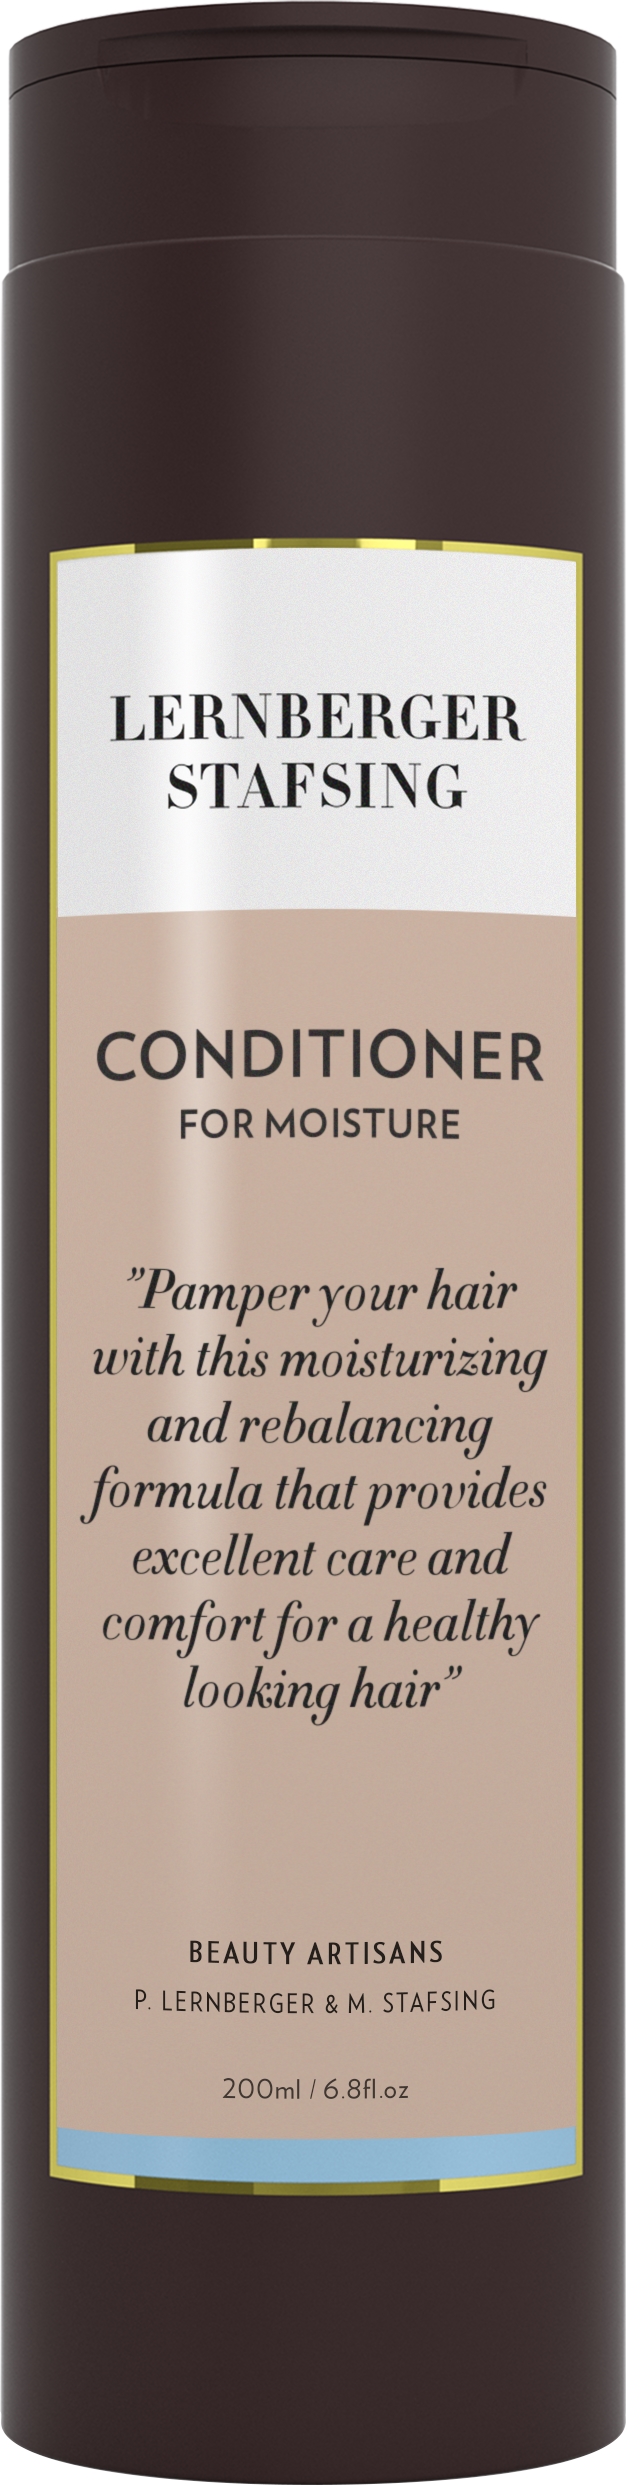 For Moisture Hair Conditioner